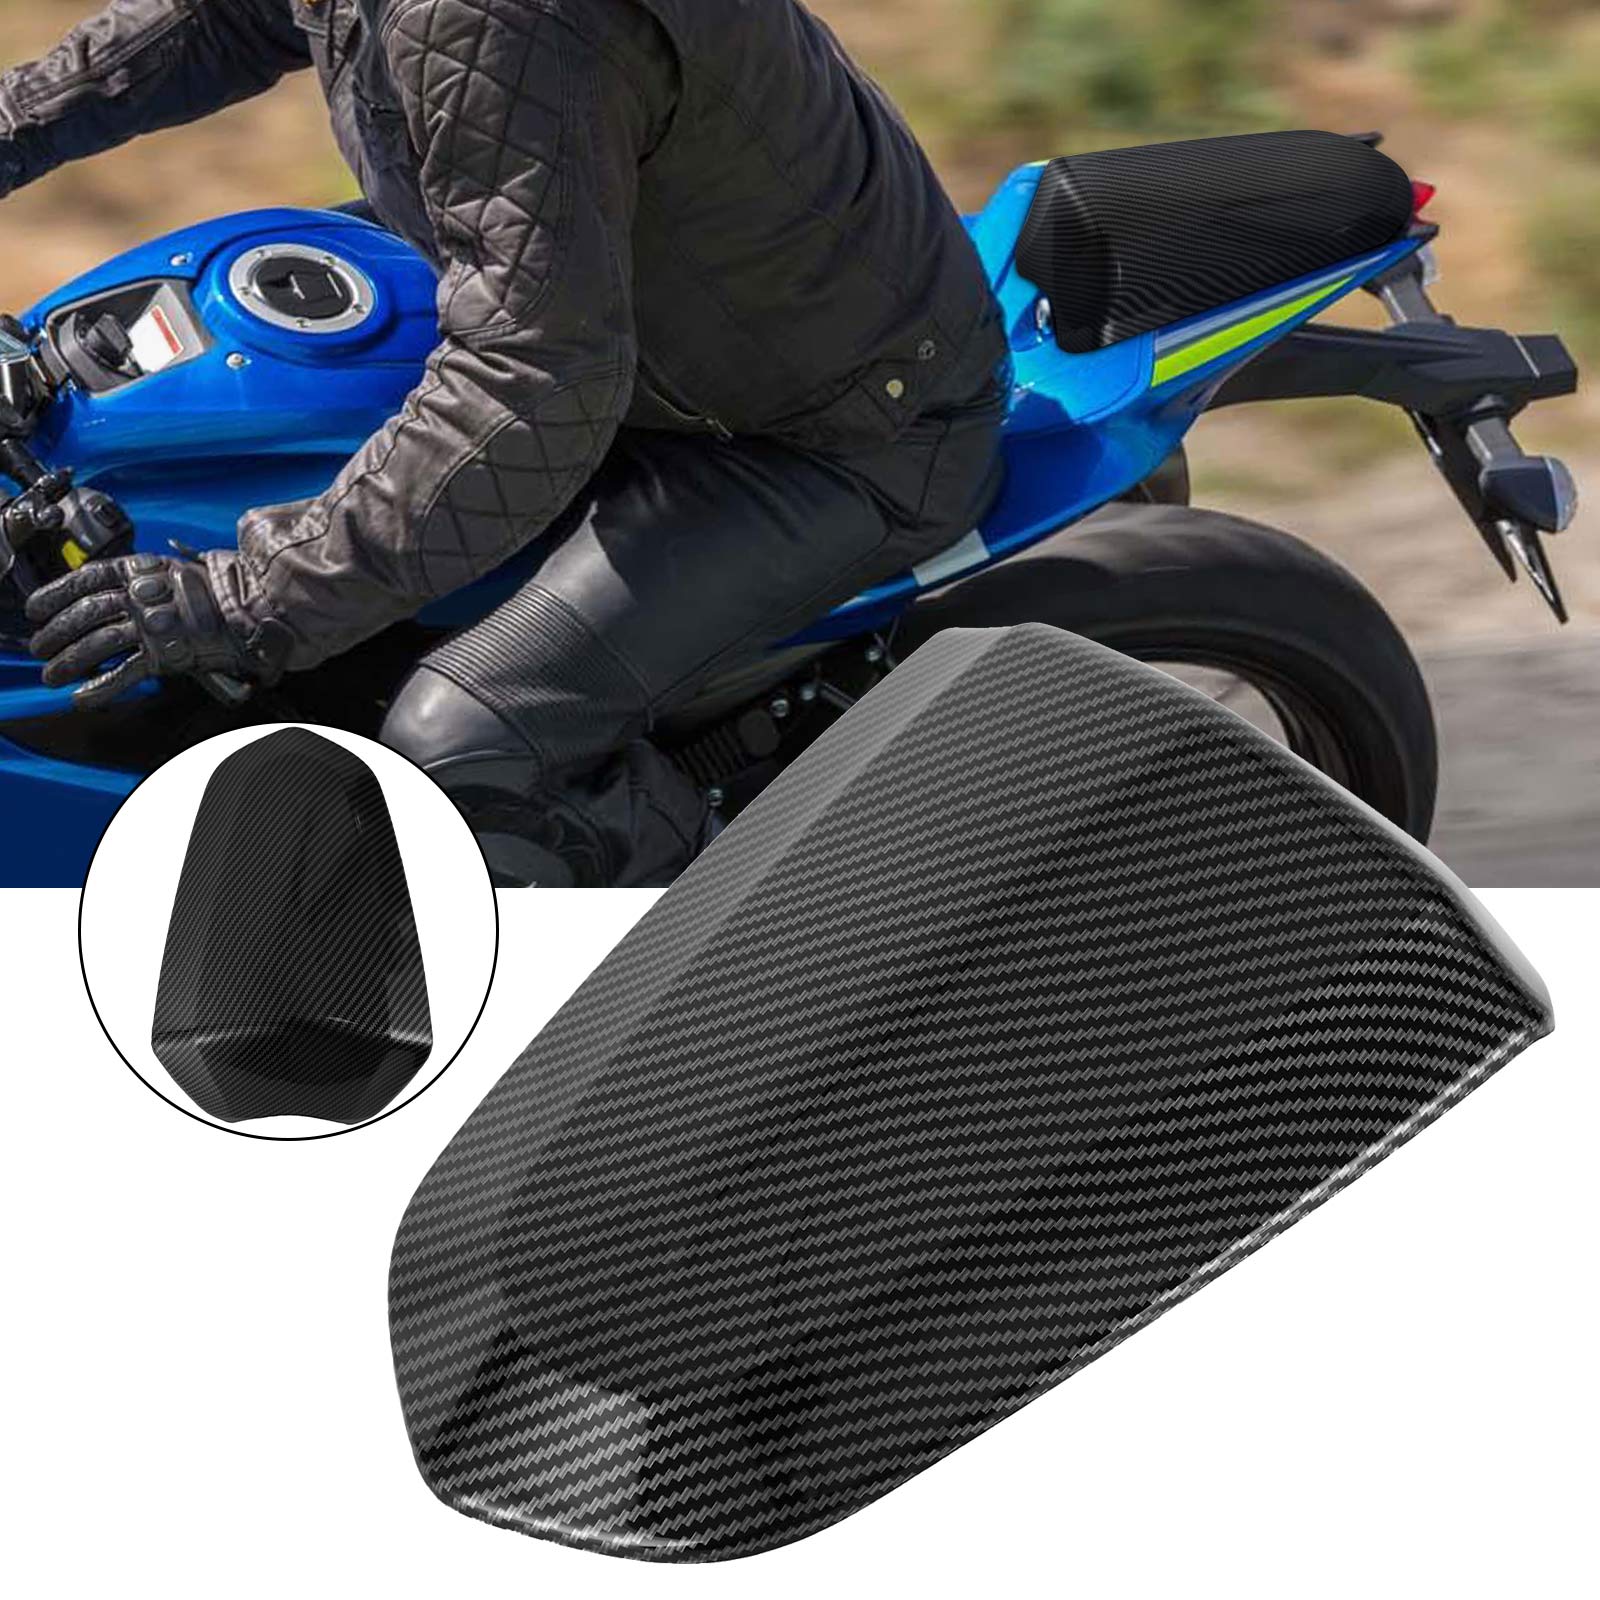 Motorcycle Rear Seat Fairing Cover Cowl fit for SUZUKI GSX-S/GSX-R 125 2017-2021 Generic